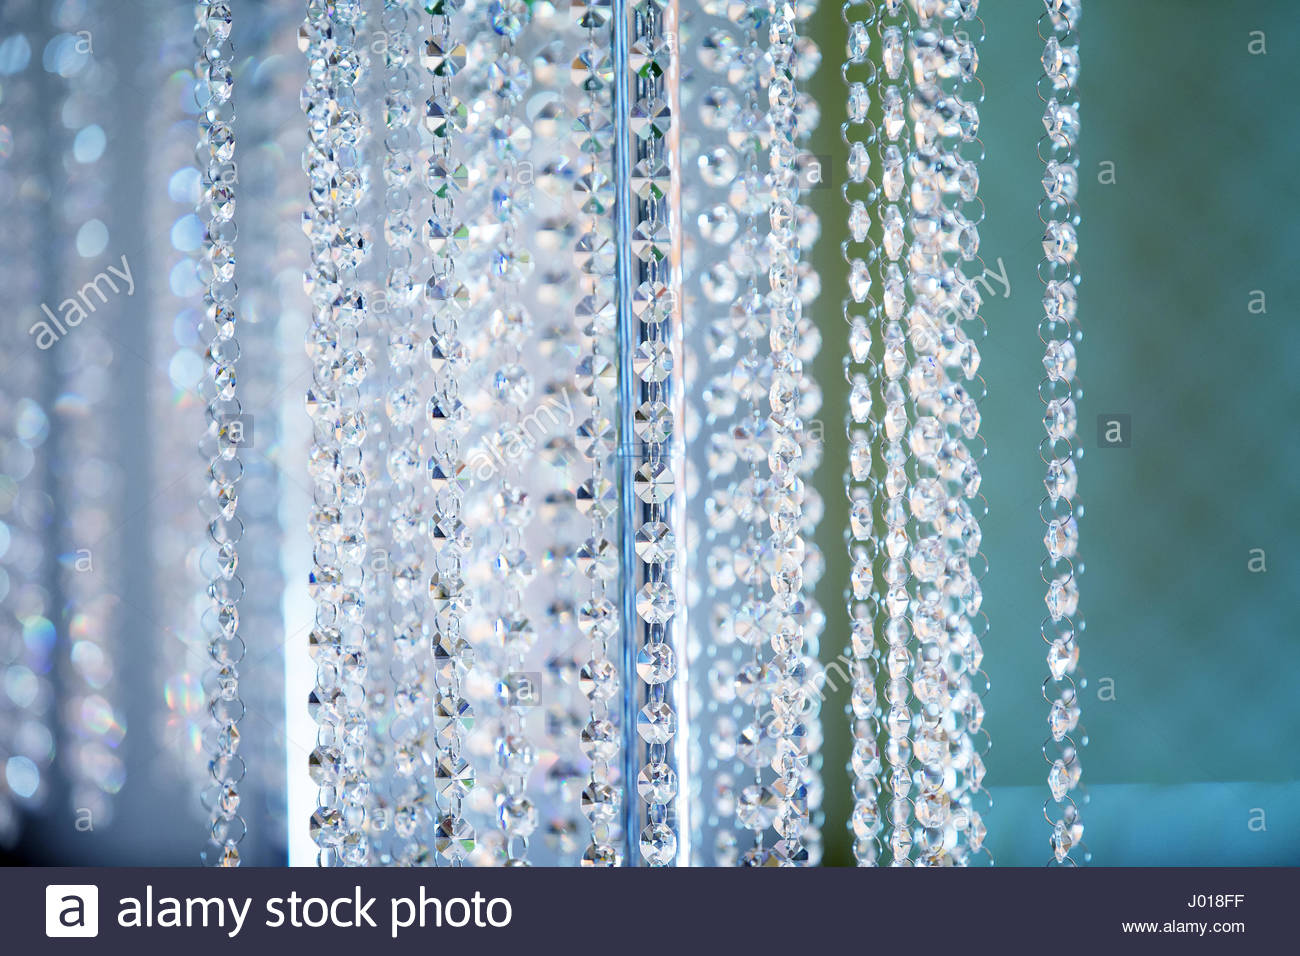 Decoration Crystal Chandelier Background In Cold Colors Stock